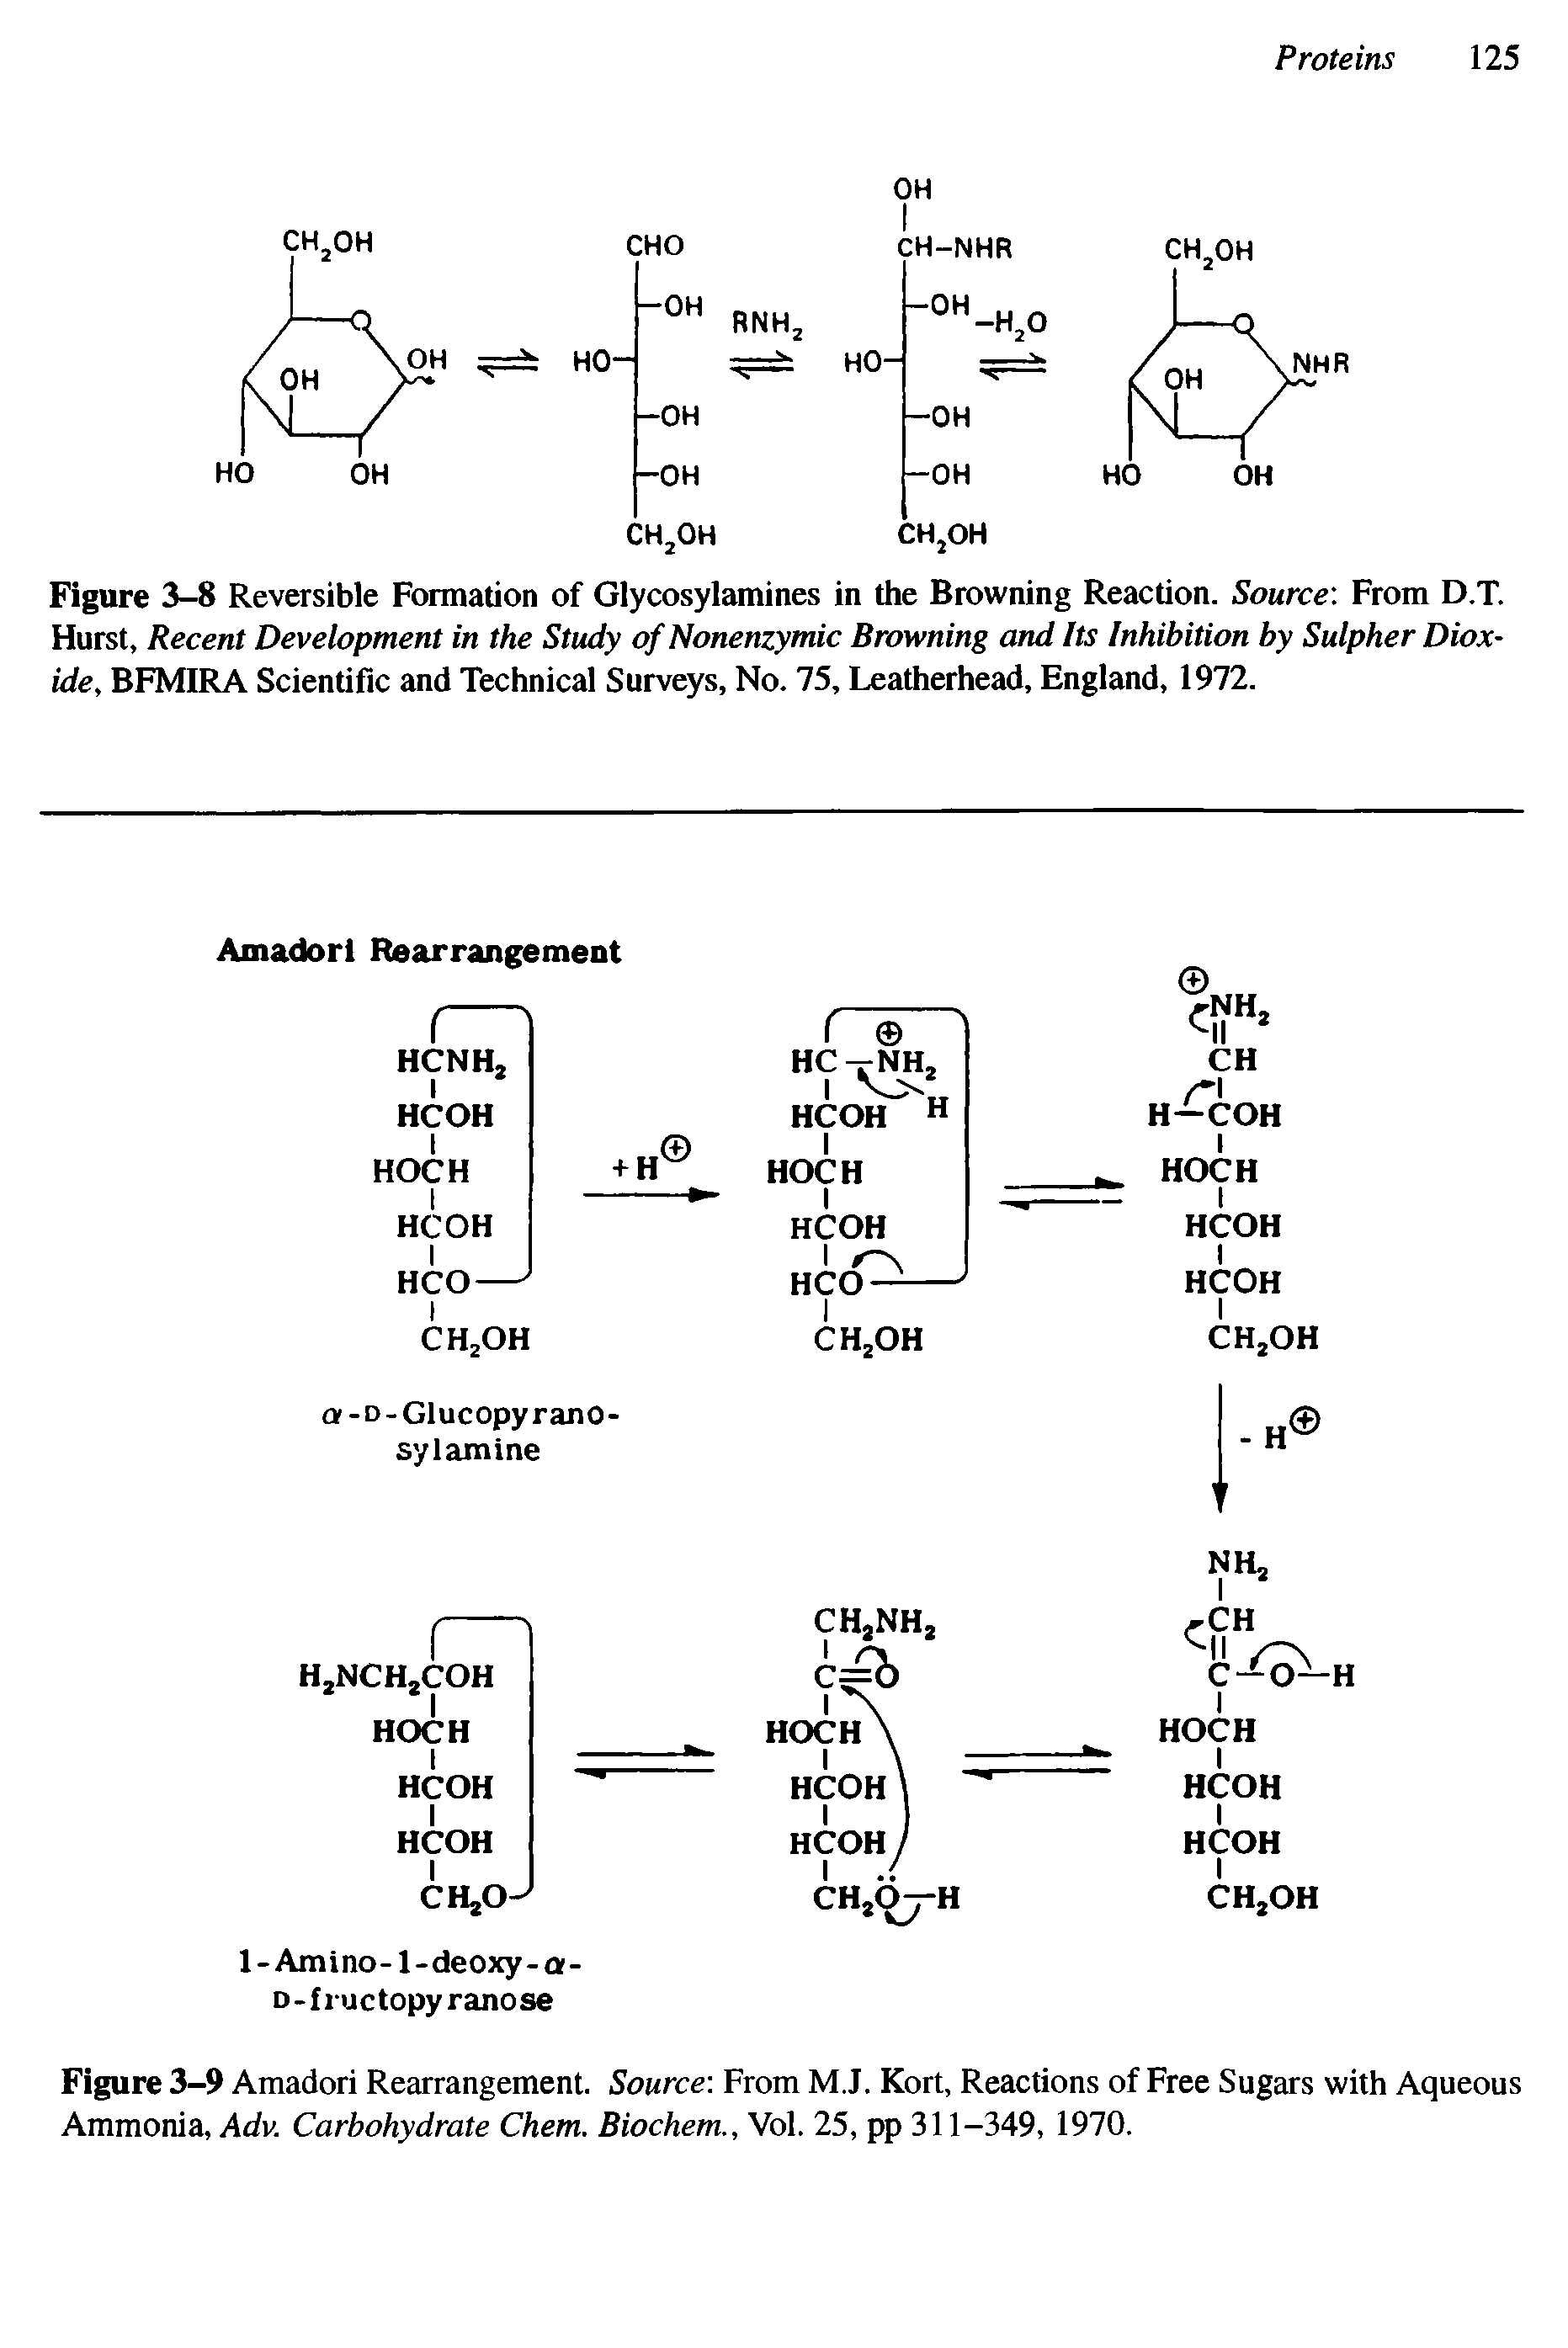 Figure 3-9 Amadori Rearrangement. Source From M.J. Kort, Reactions of Free Sugars with Aqueous Ammonia, Adv. Carbohydrate Chem. Biochem., Vol. 25, pp 311-349, 1970.